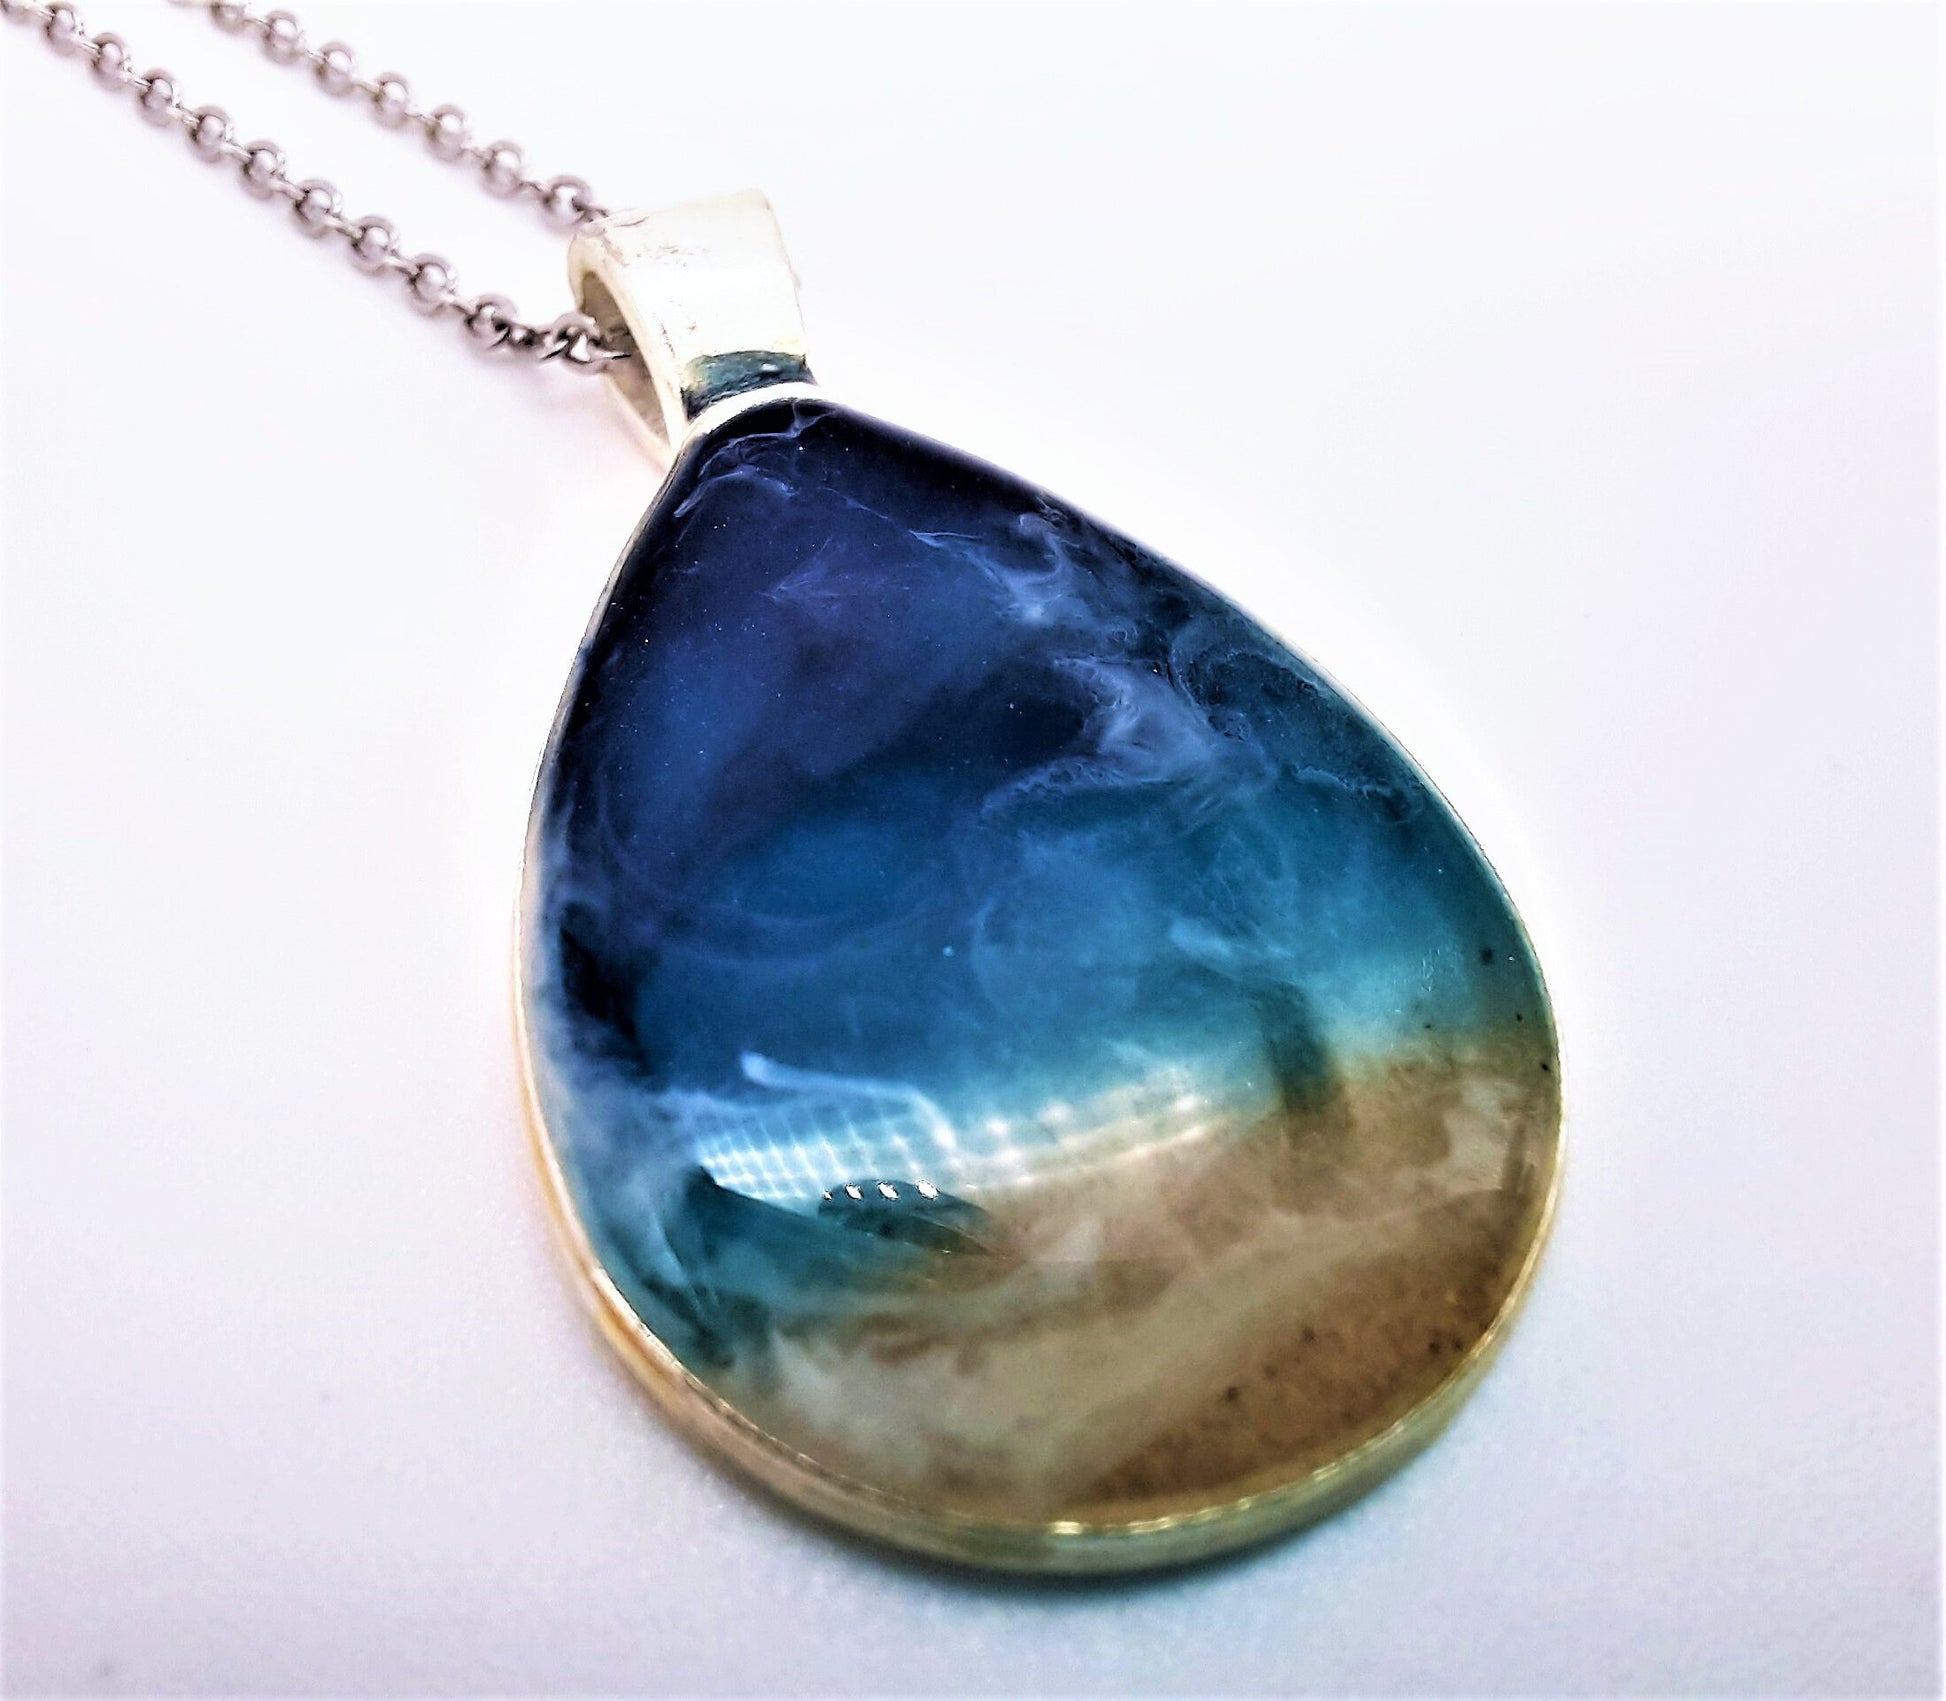 Resin Waves Teardrop Shaped Ocean Pendant / Beach Scene Necklace, Handmade with Resin and Real Sand - One of a Kind - Not a Photograph